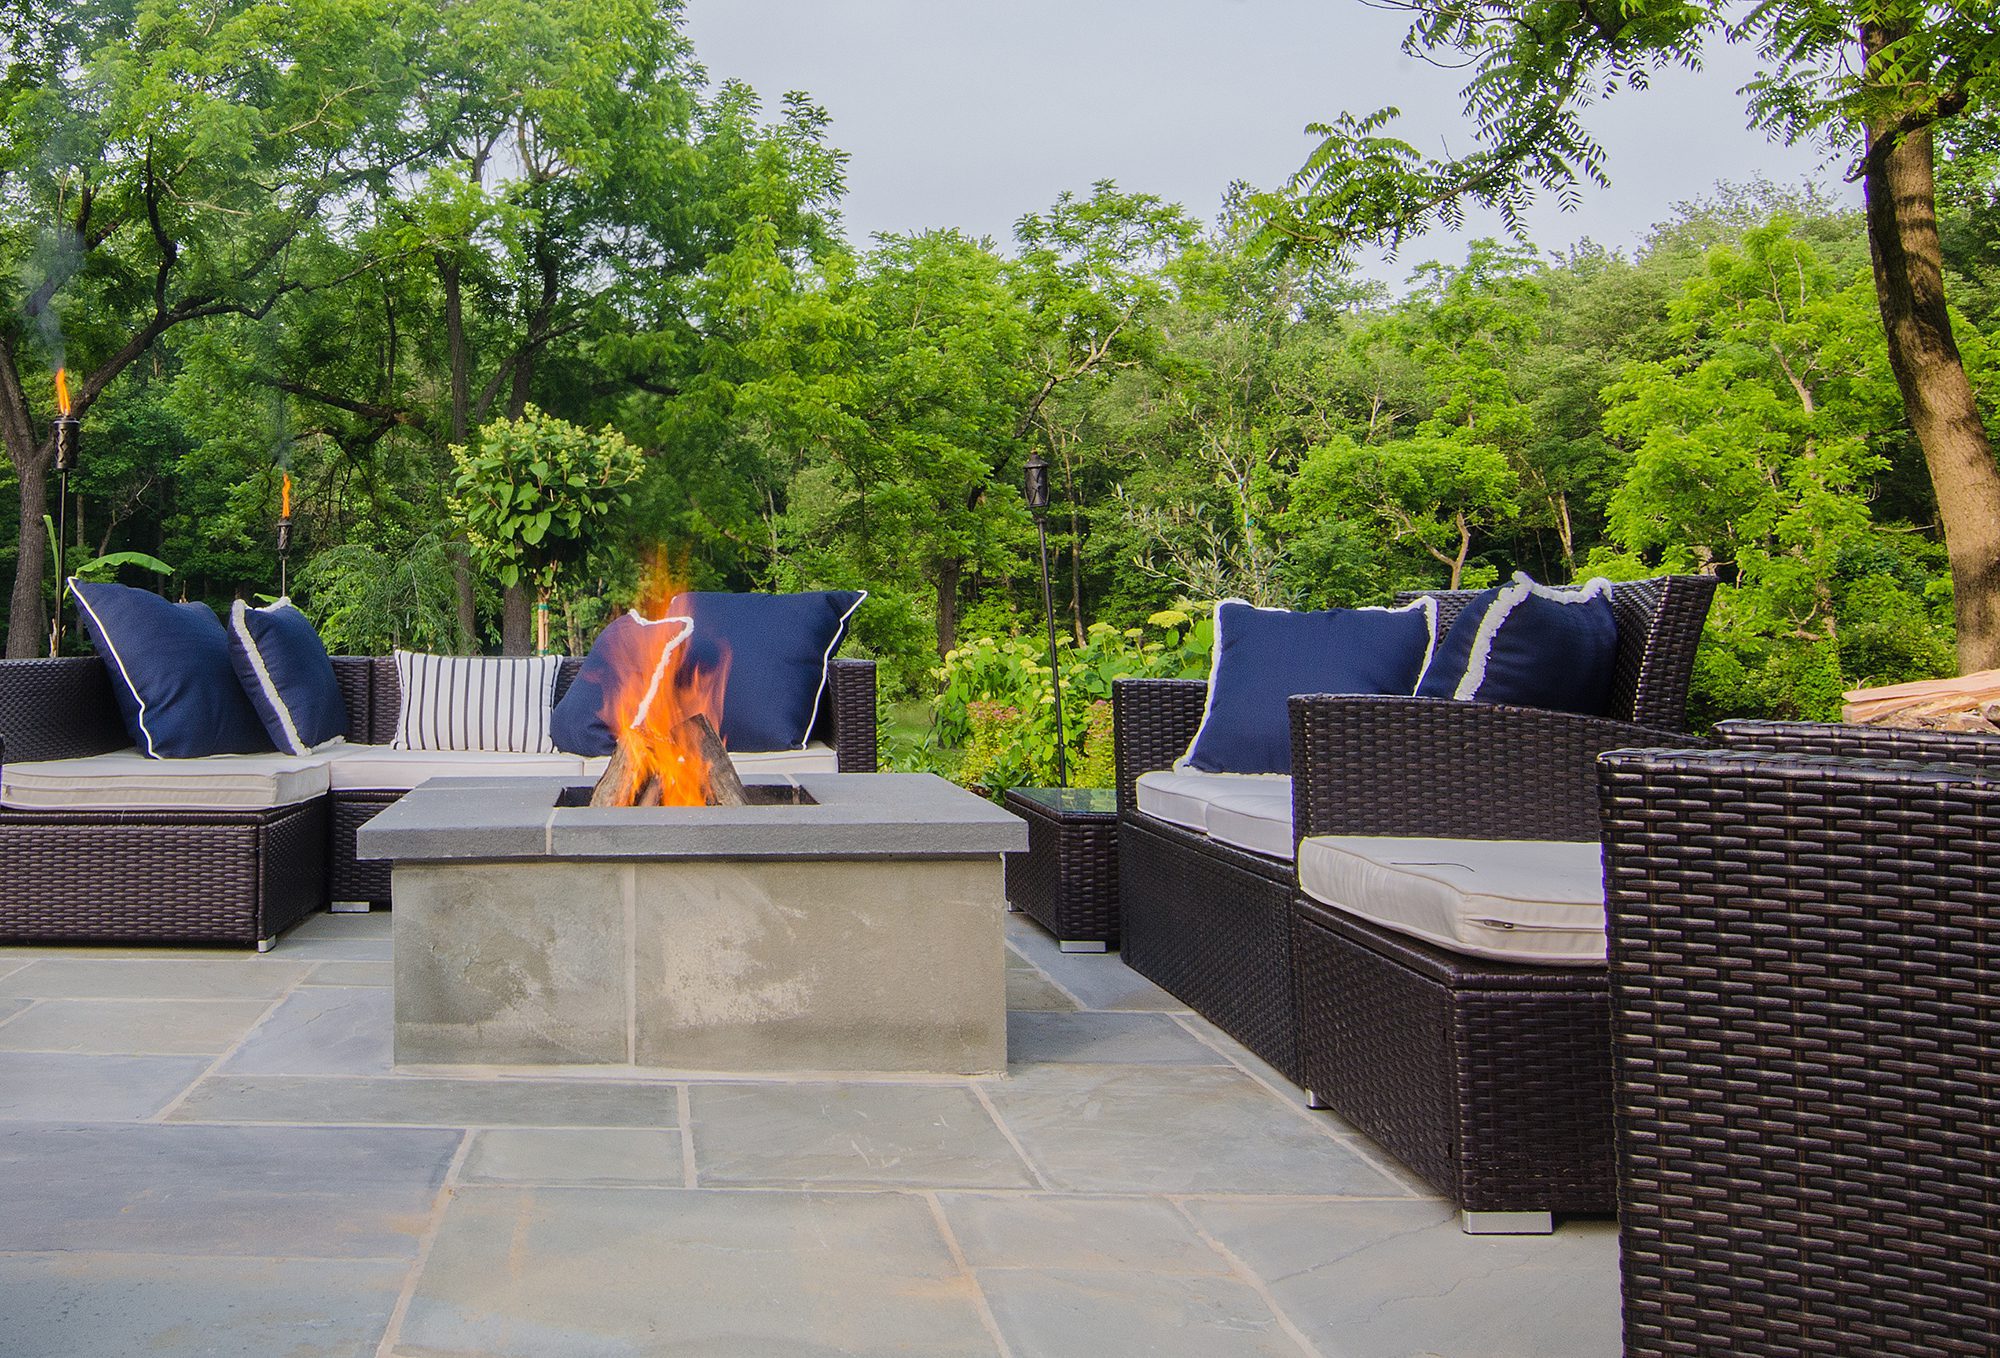 A wood-burning fire burns in a fire pit surrounded by chairs and pillows.